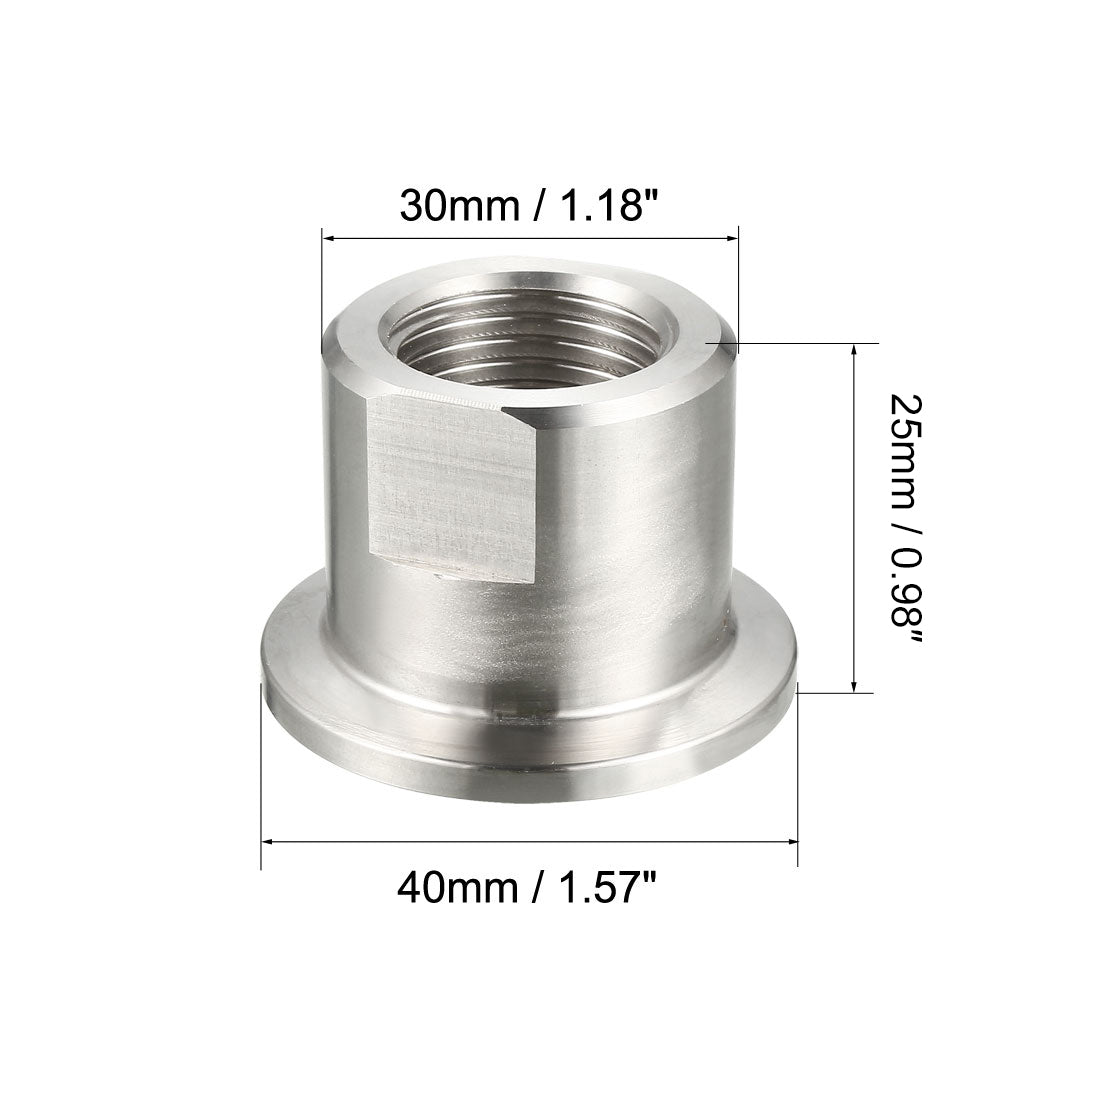 uxcell Uxcell Pipe Fitting KF25 Female Threaded 1/2 PT to Clamp OD 40mm Ferrule 2 Pcs